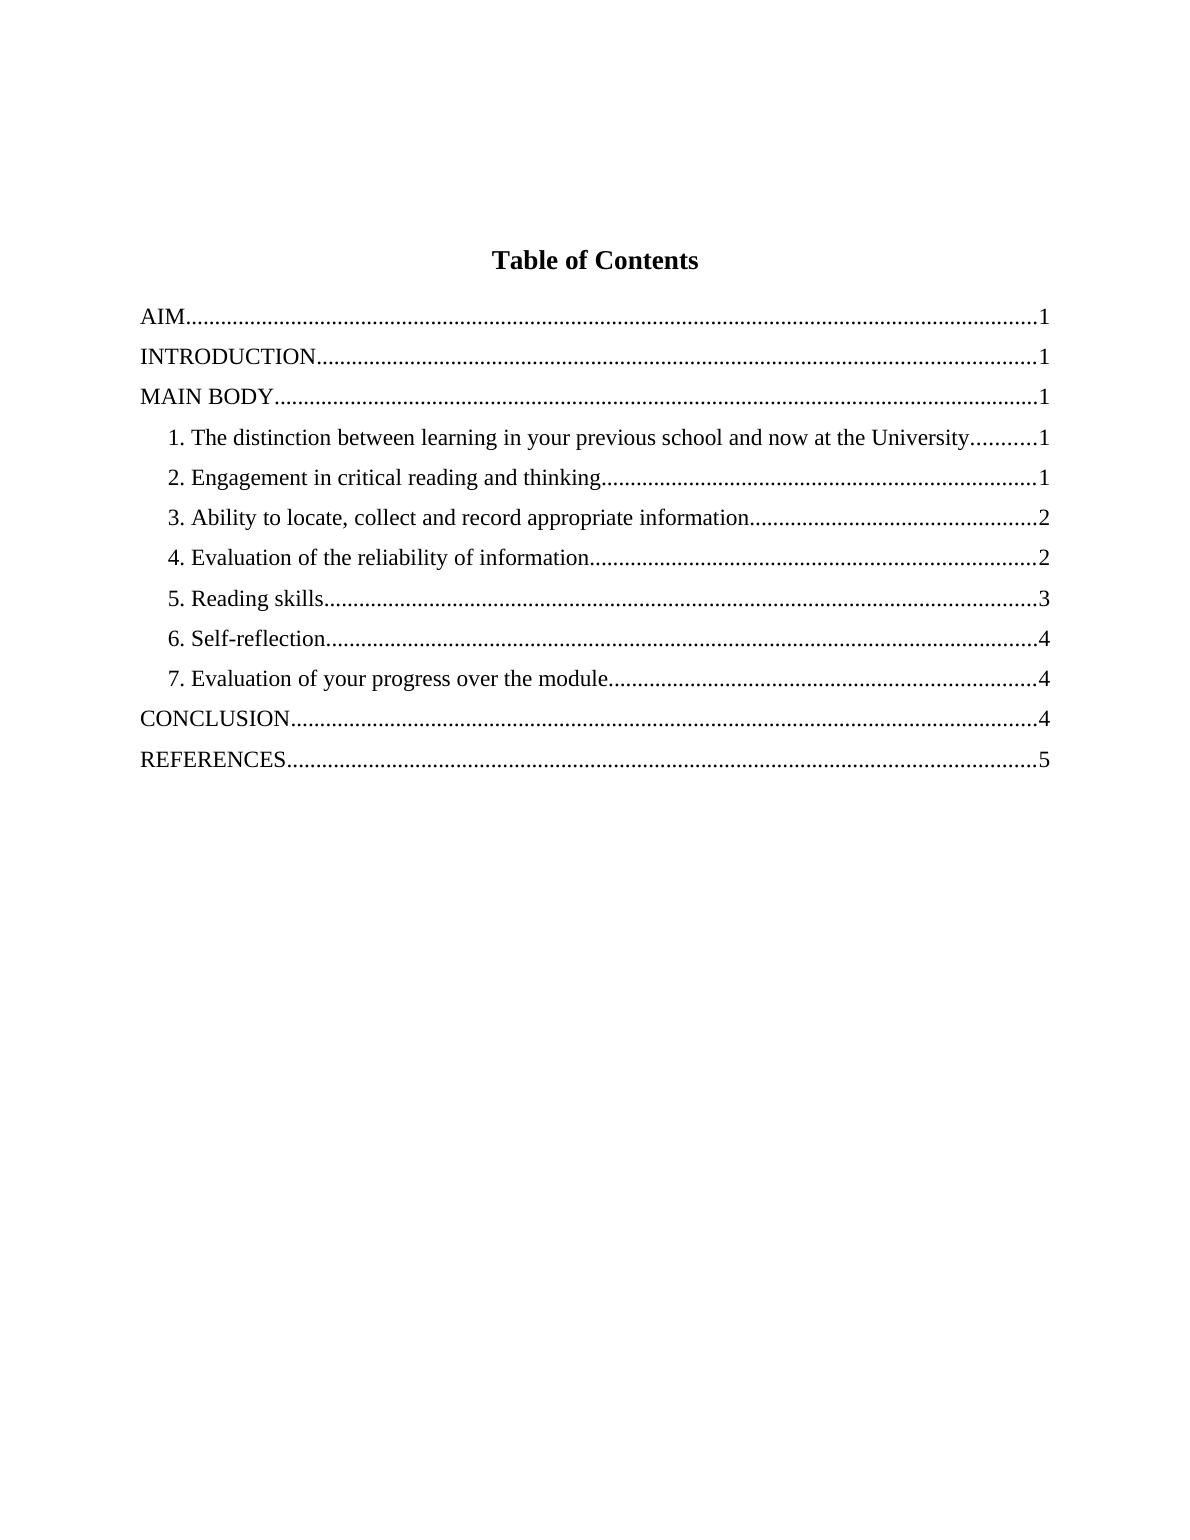 Higher Education Skills and Competencies - Assignment_2